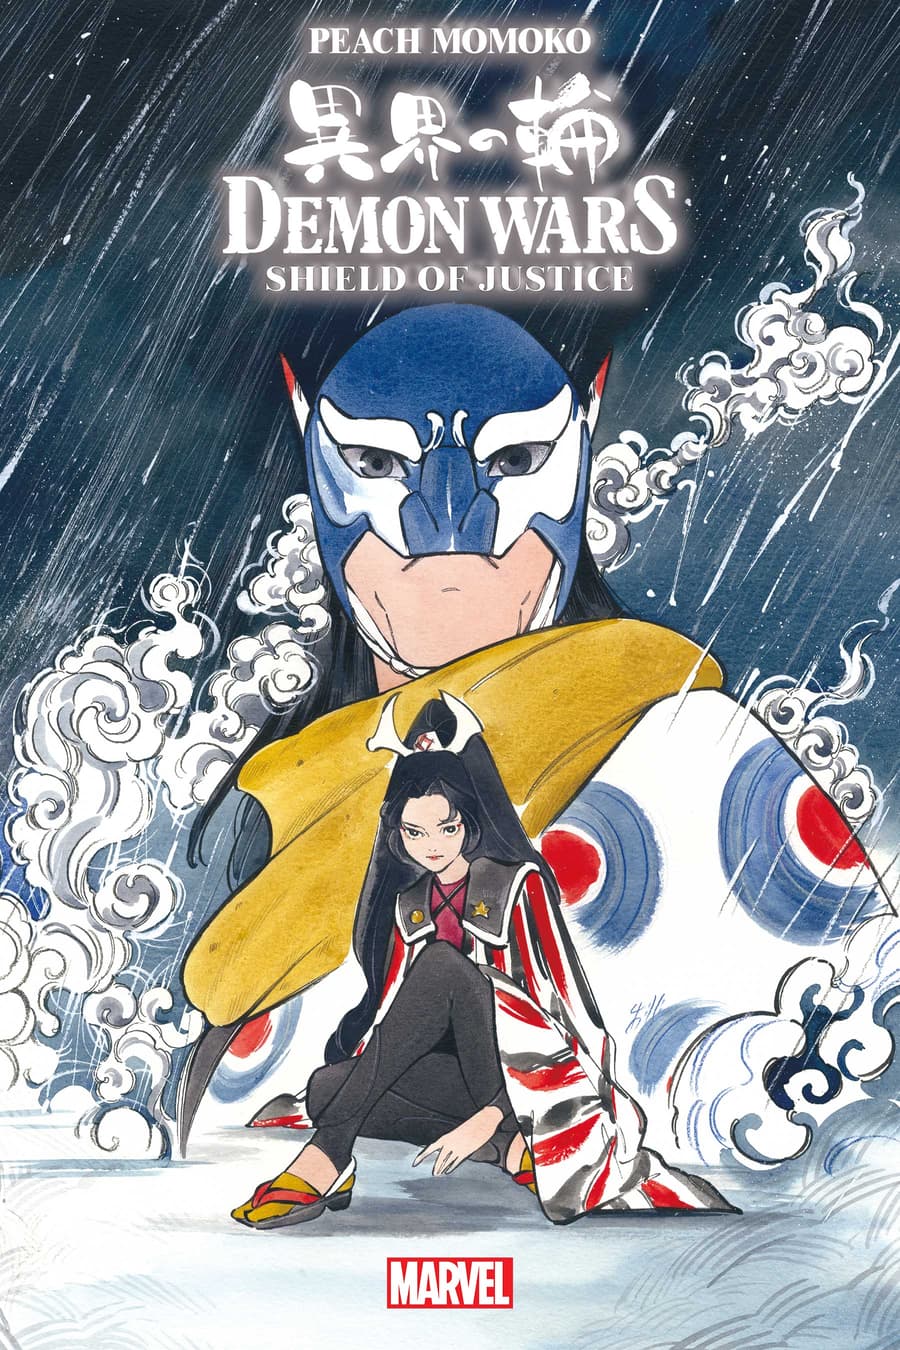 DEMON WARS: SHIELD OF JUSTICE #1 cover by Peach Momoko